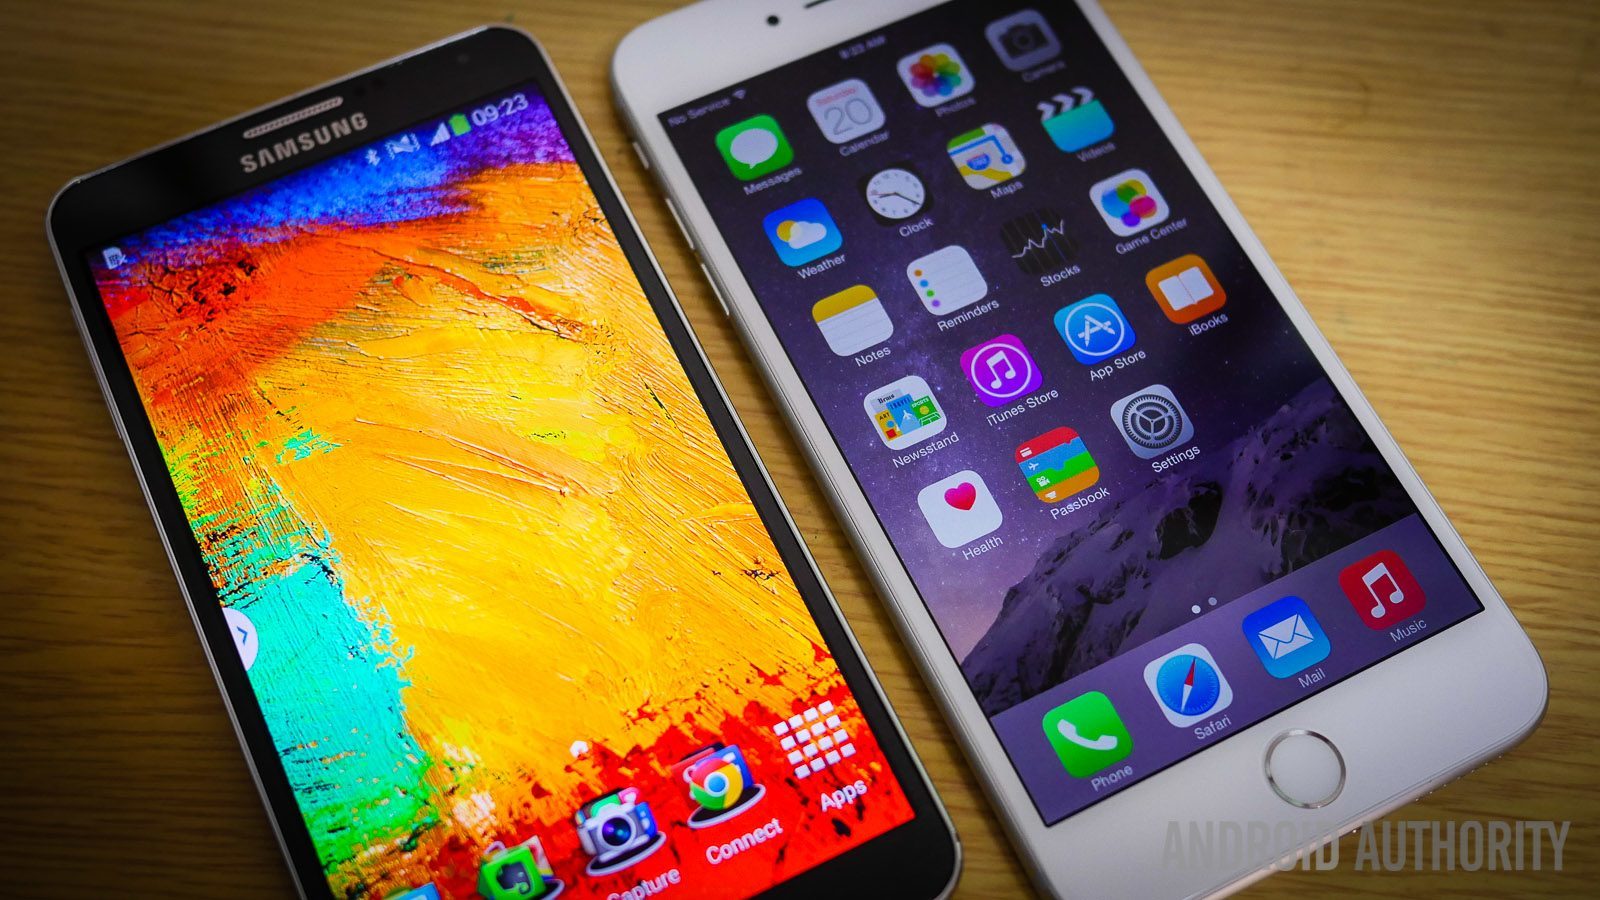 iphone 6 plus vs samsung galaxy note 3 quick look aa (15 of 20)